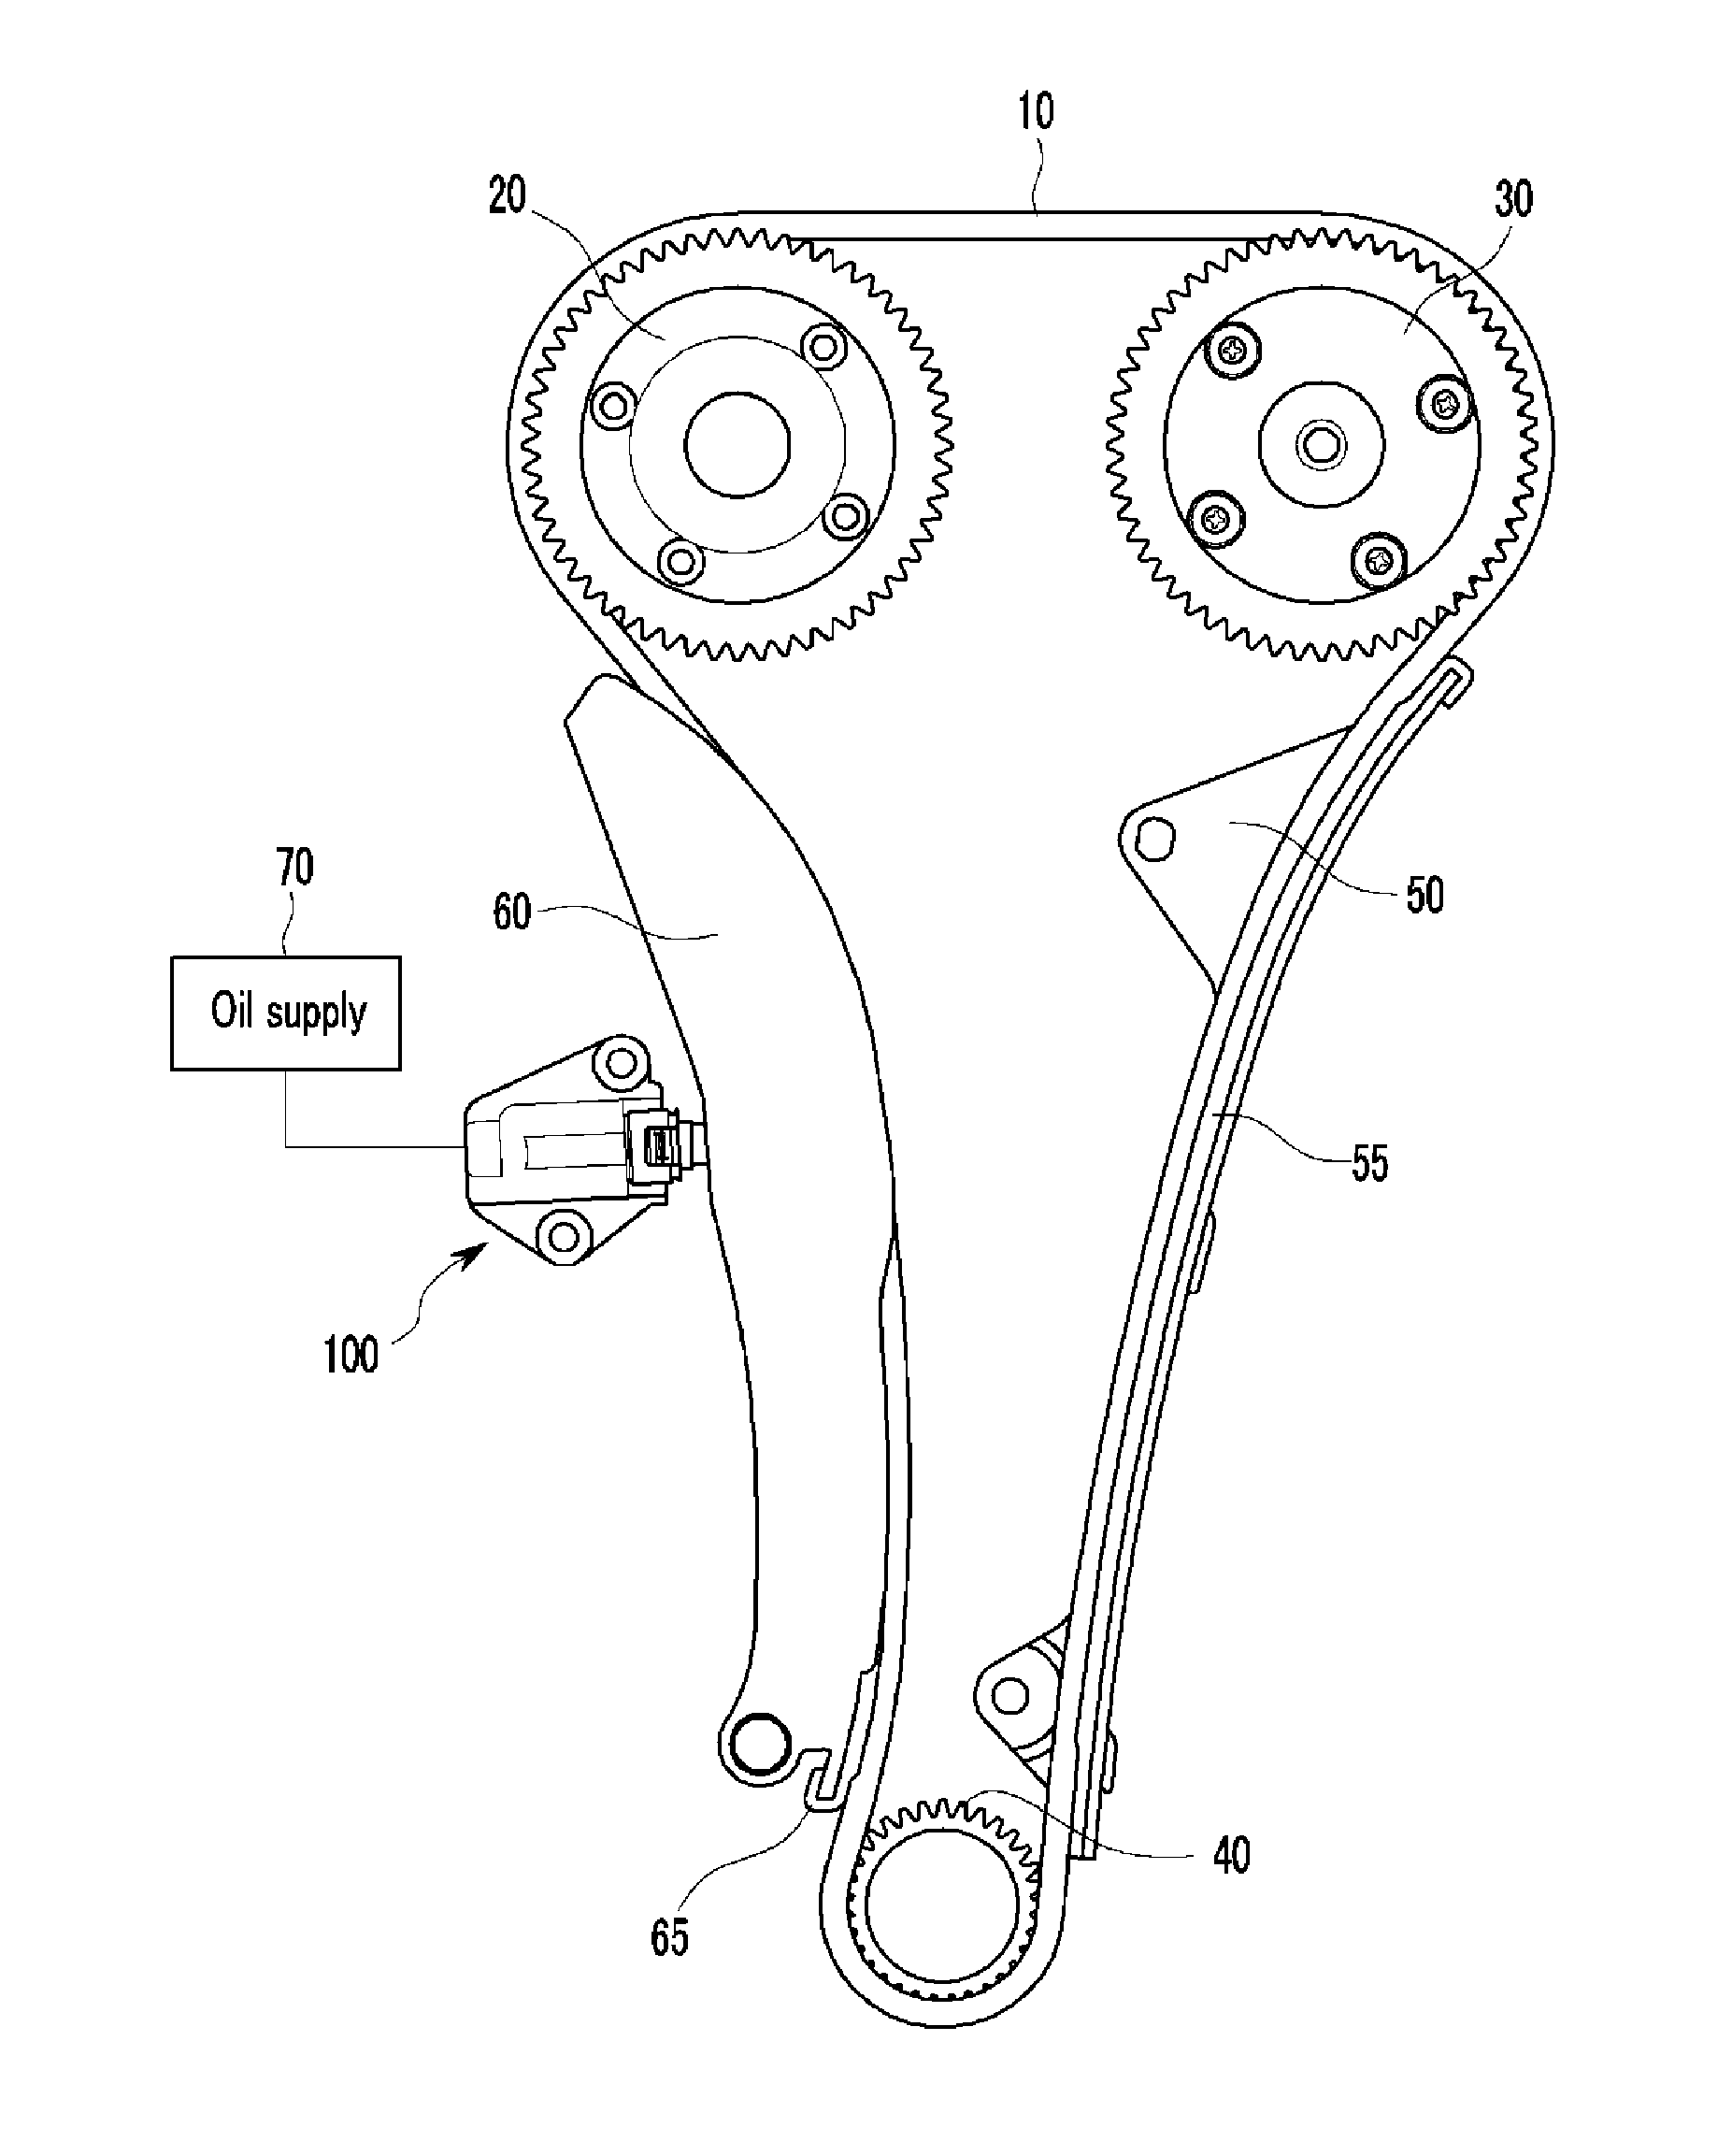 Hydraulic timing chain tensioner and timing chain system